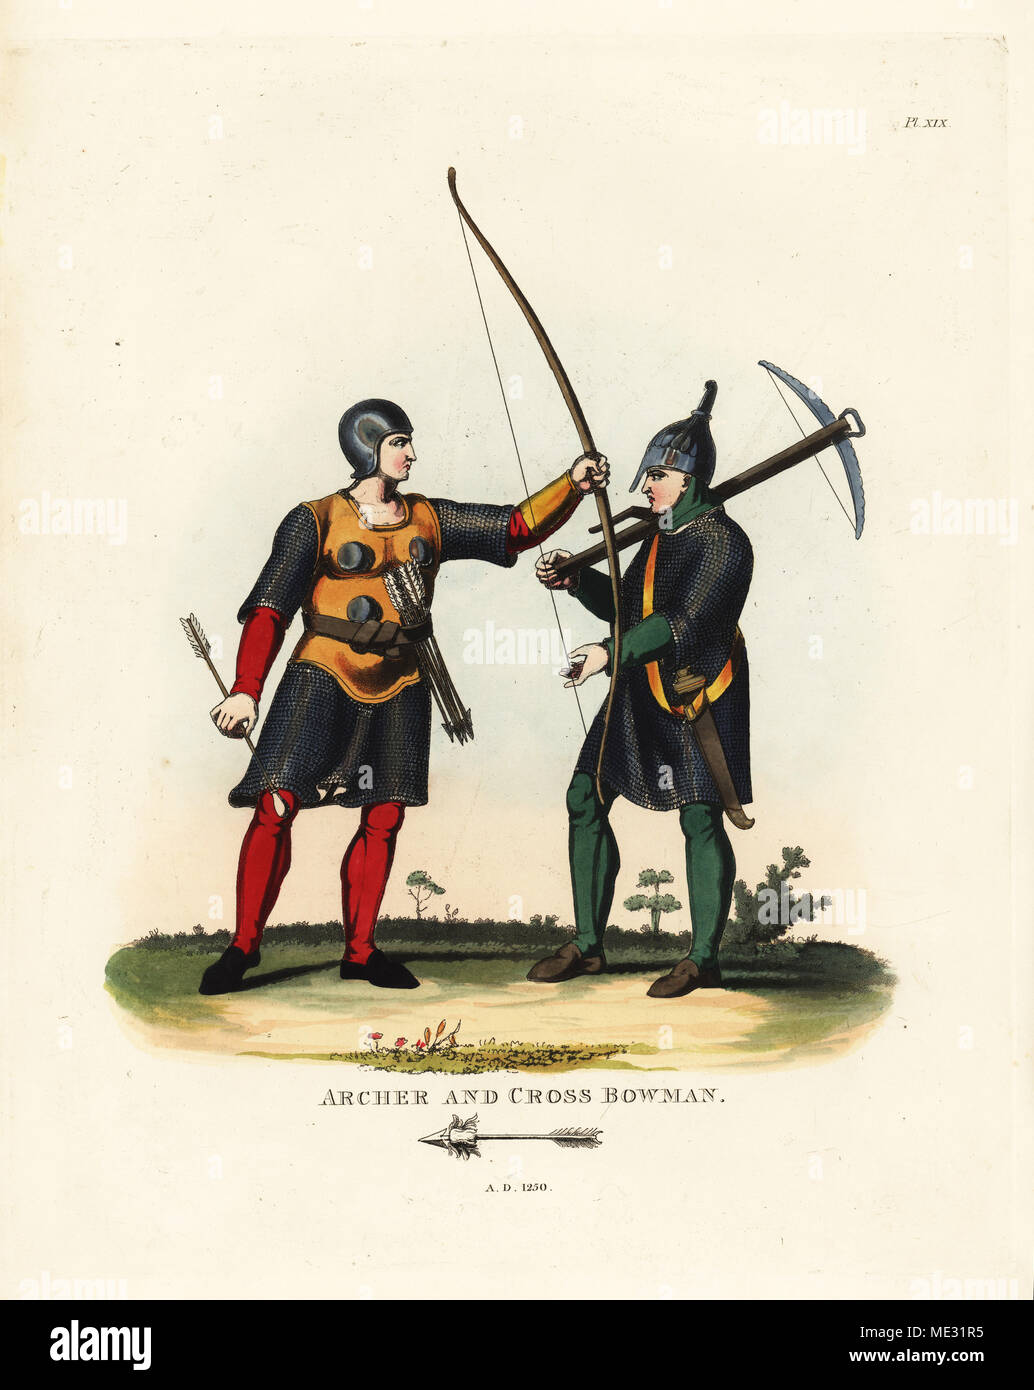 Archer and crossbow man, 1250. English longbowman in skullcap helmet cerebrerium, hauberk, leather breastplate and arrows in a girdle. The crossbowman or arbalister wears a nasal helmet and hauberk and carries a short sword baselard. Handcoloured lithograph after an illustration by S.R. Meyrick from Sir Samuel Rush Meyrick's A Critical Inquiry into Antient Armour, John Dowding, London, 1842. Stock Photo